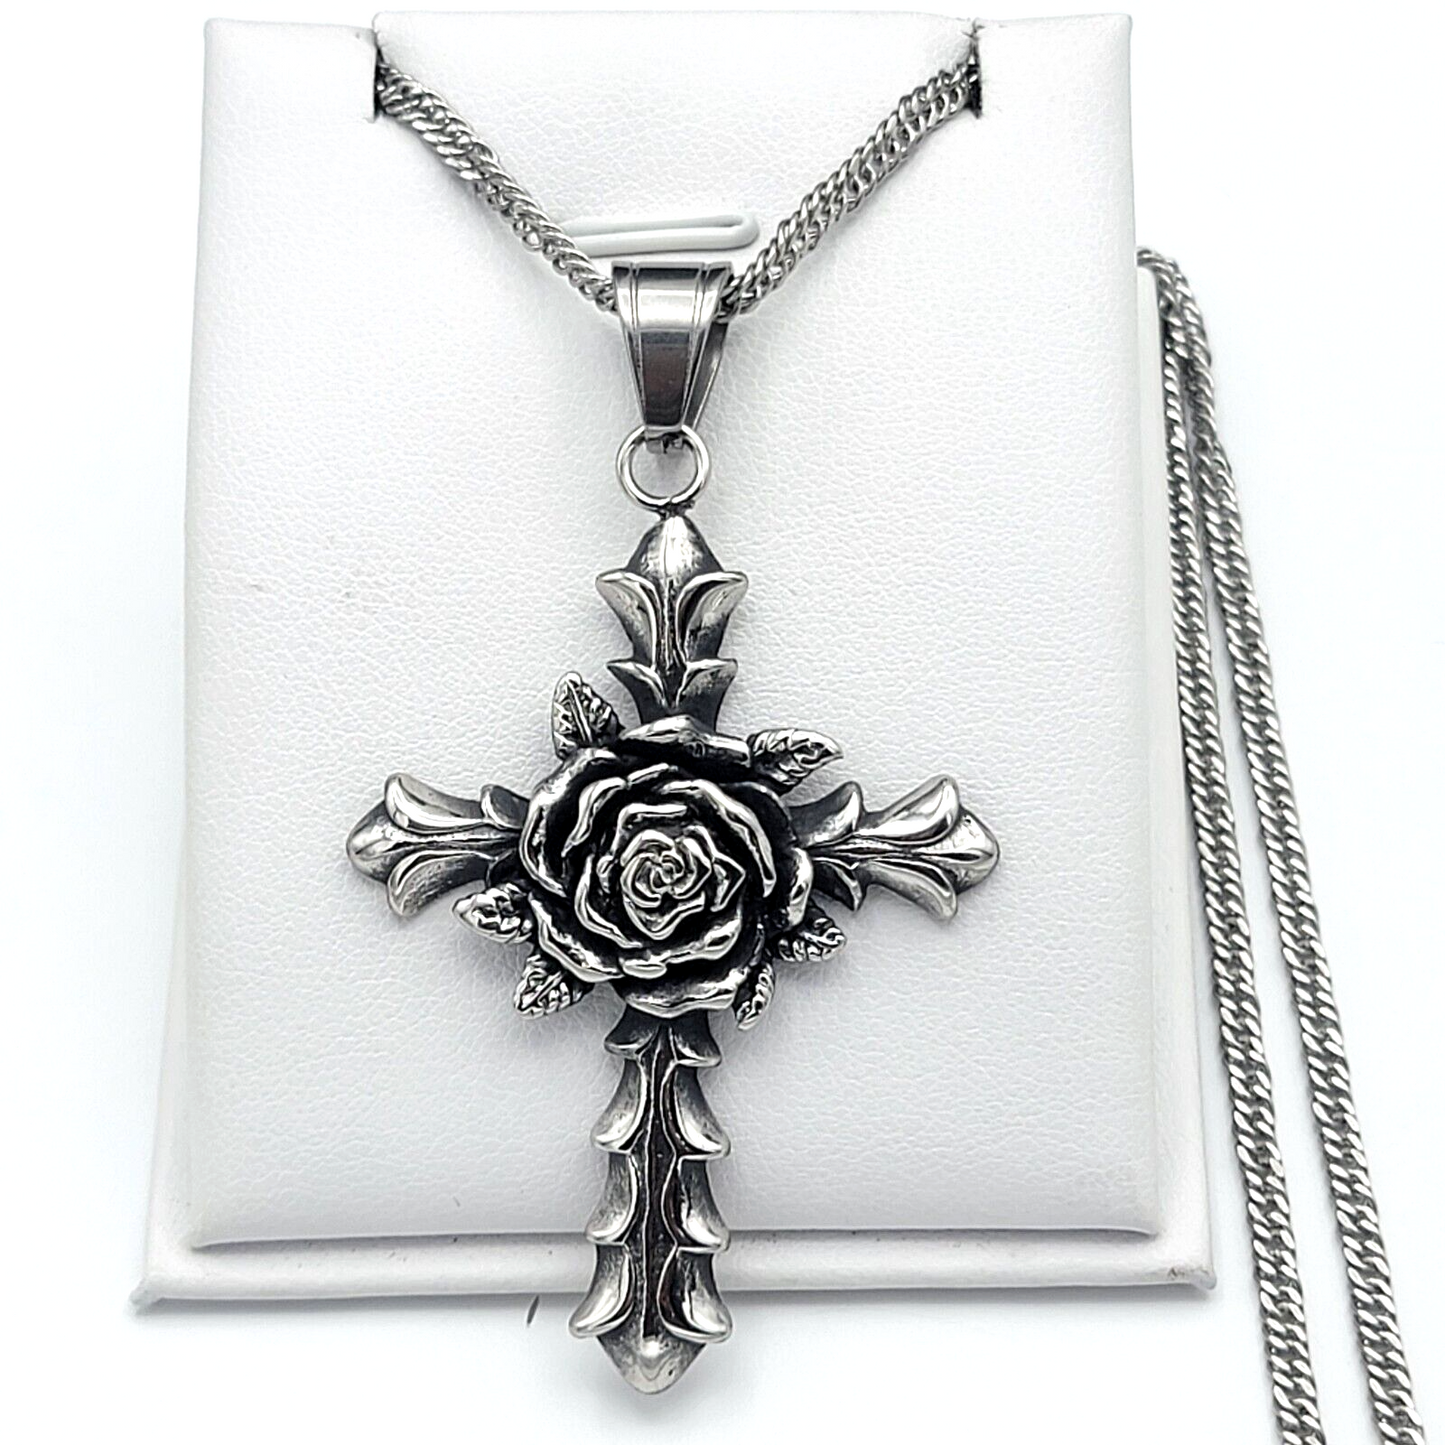 Necklaces - Stainless Steel. Vintage Silver Rose Cross Pendant & Chain.